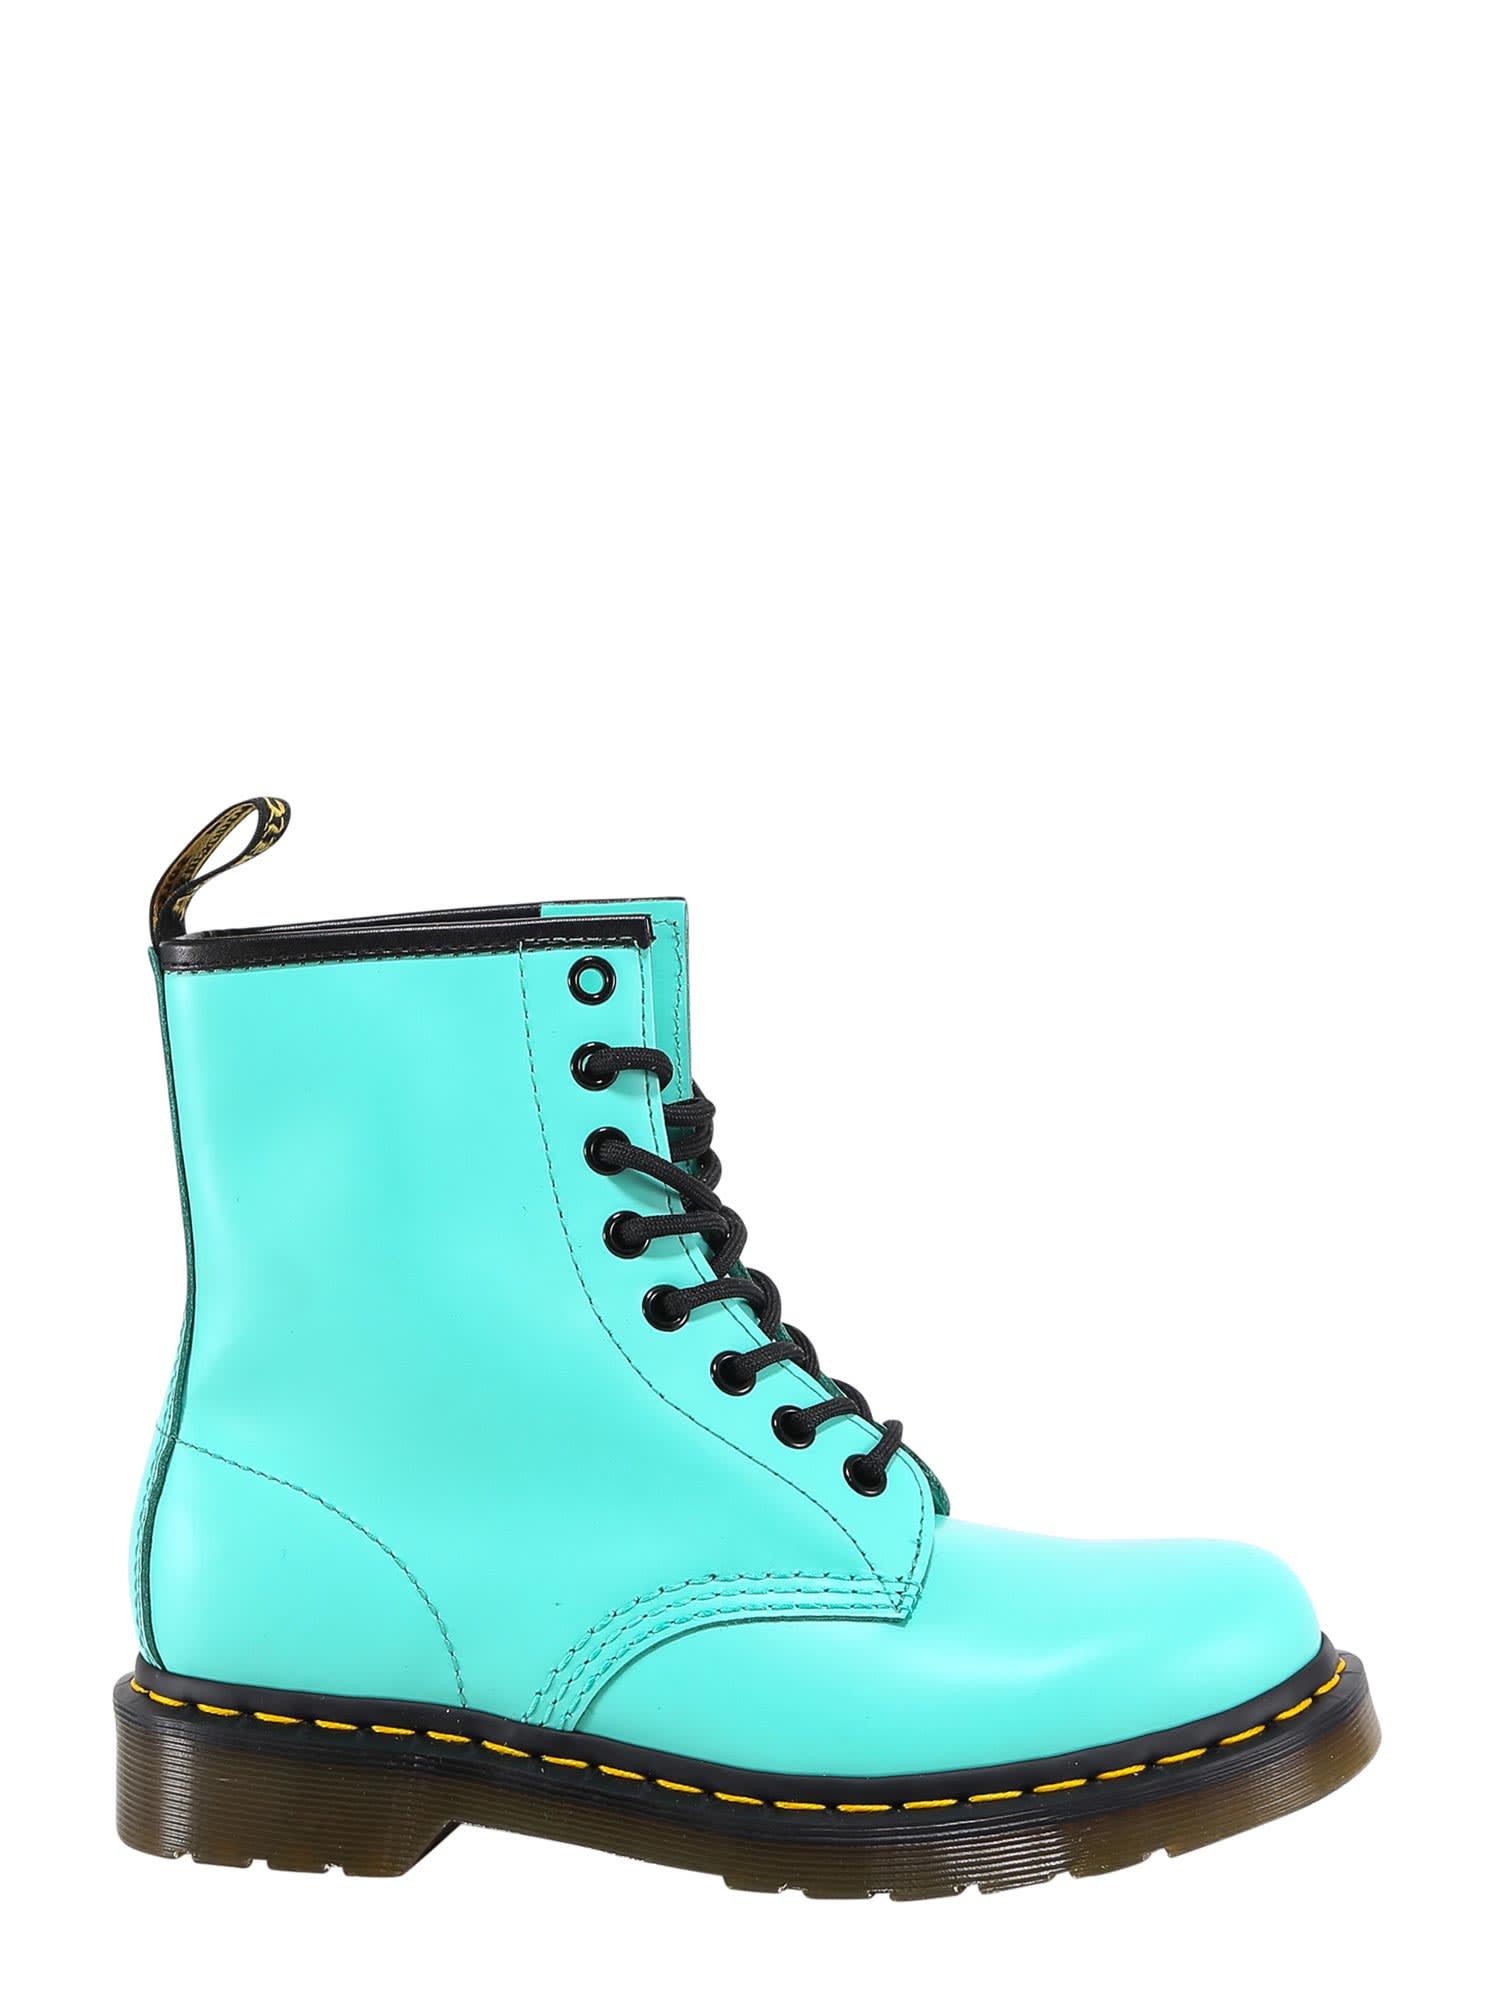 DR. MARTENS' ANKLE BOOTS,DMS1460PGSM26069983 GREEN